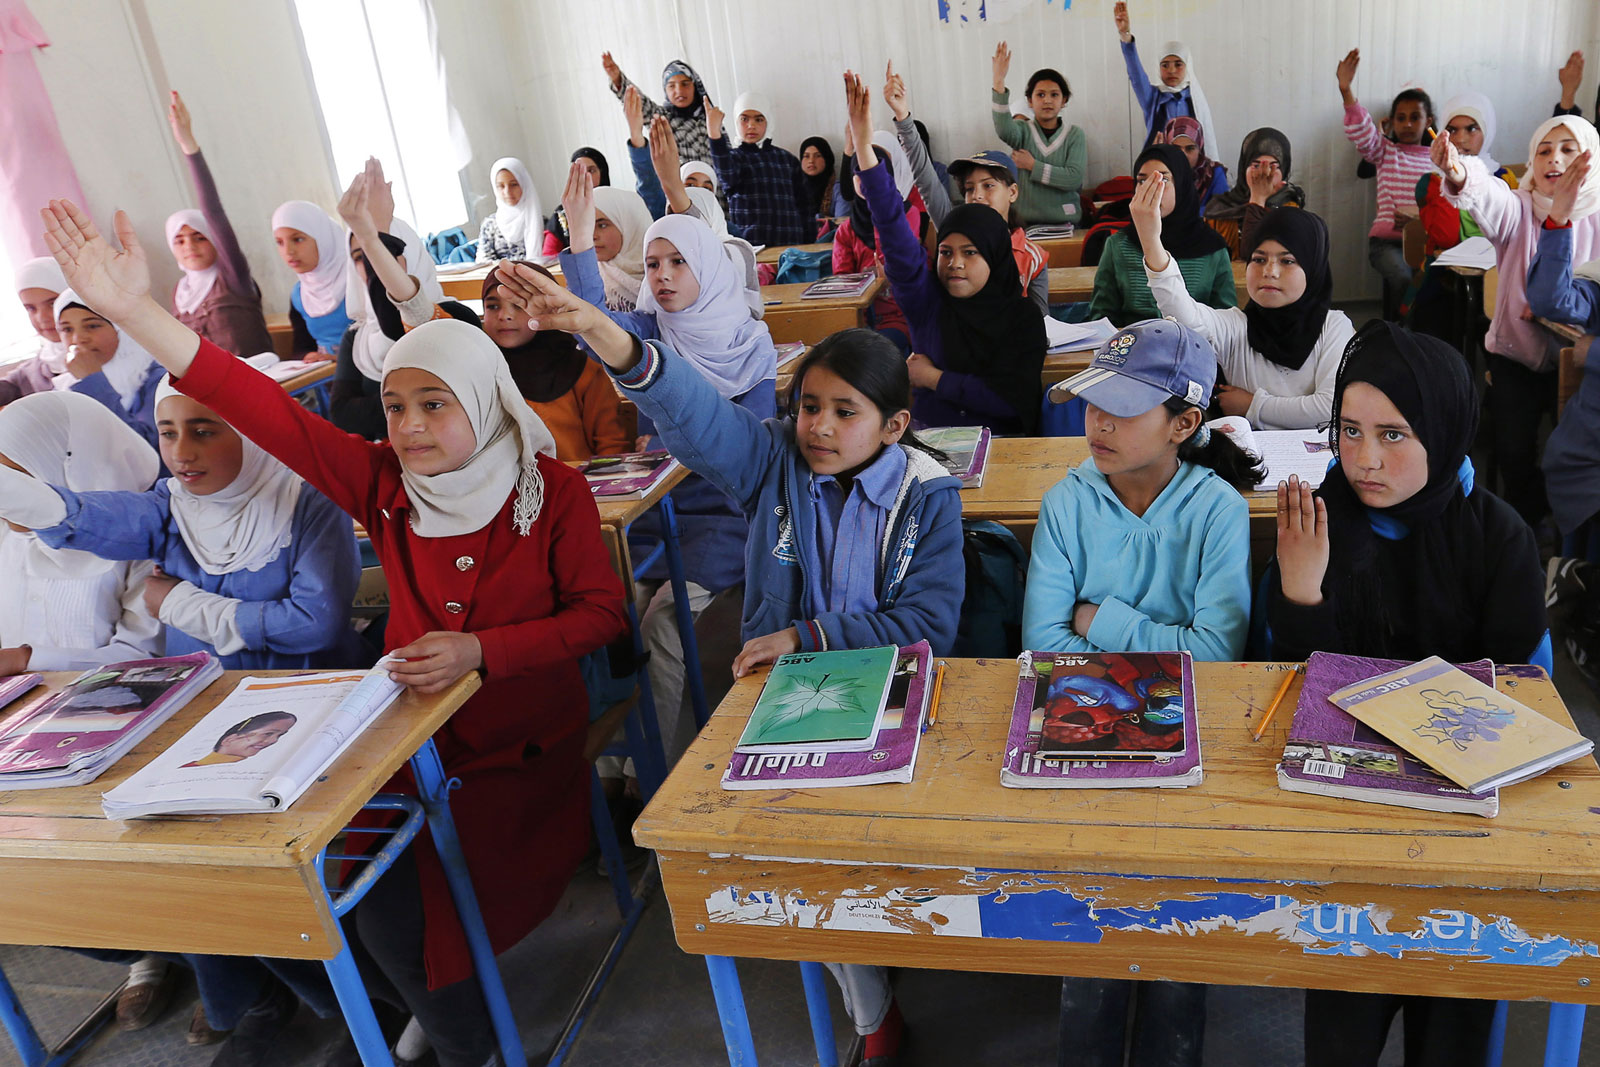 Syrian refugee students in a UNICEF school at the Al Zaatari refugee camp, near Jordan's border with Syria, March 11, 2015